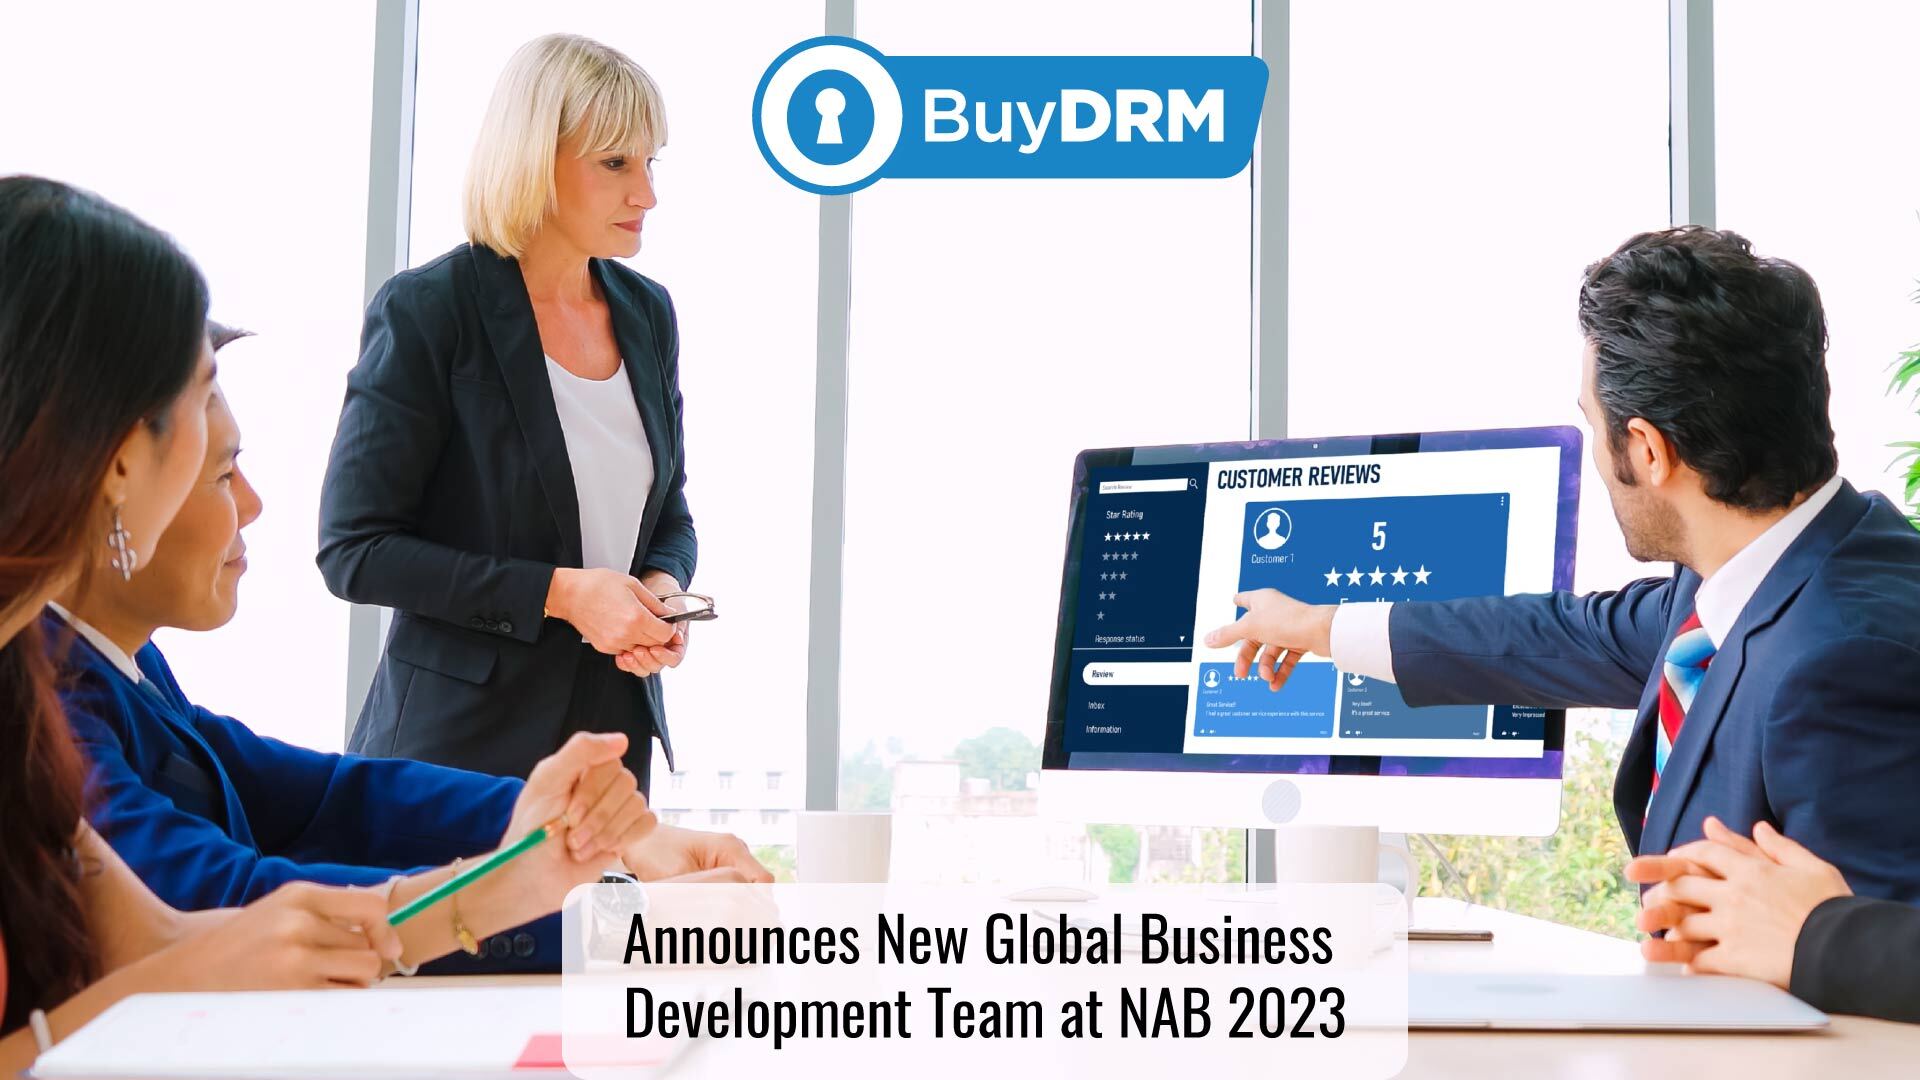 BuyDRM Announces New Global Business Development Team at NAB 2023